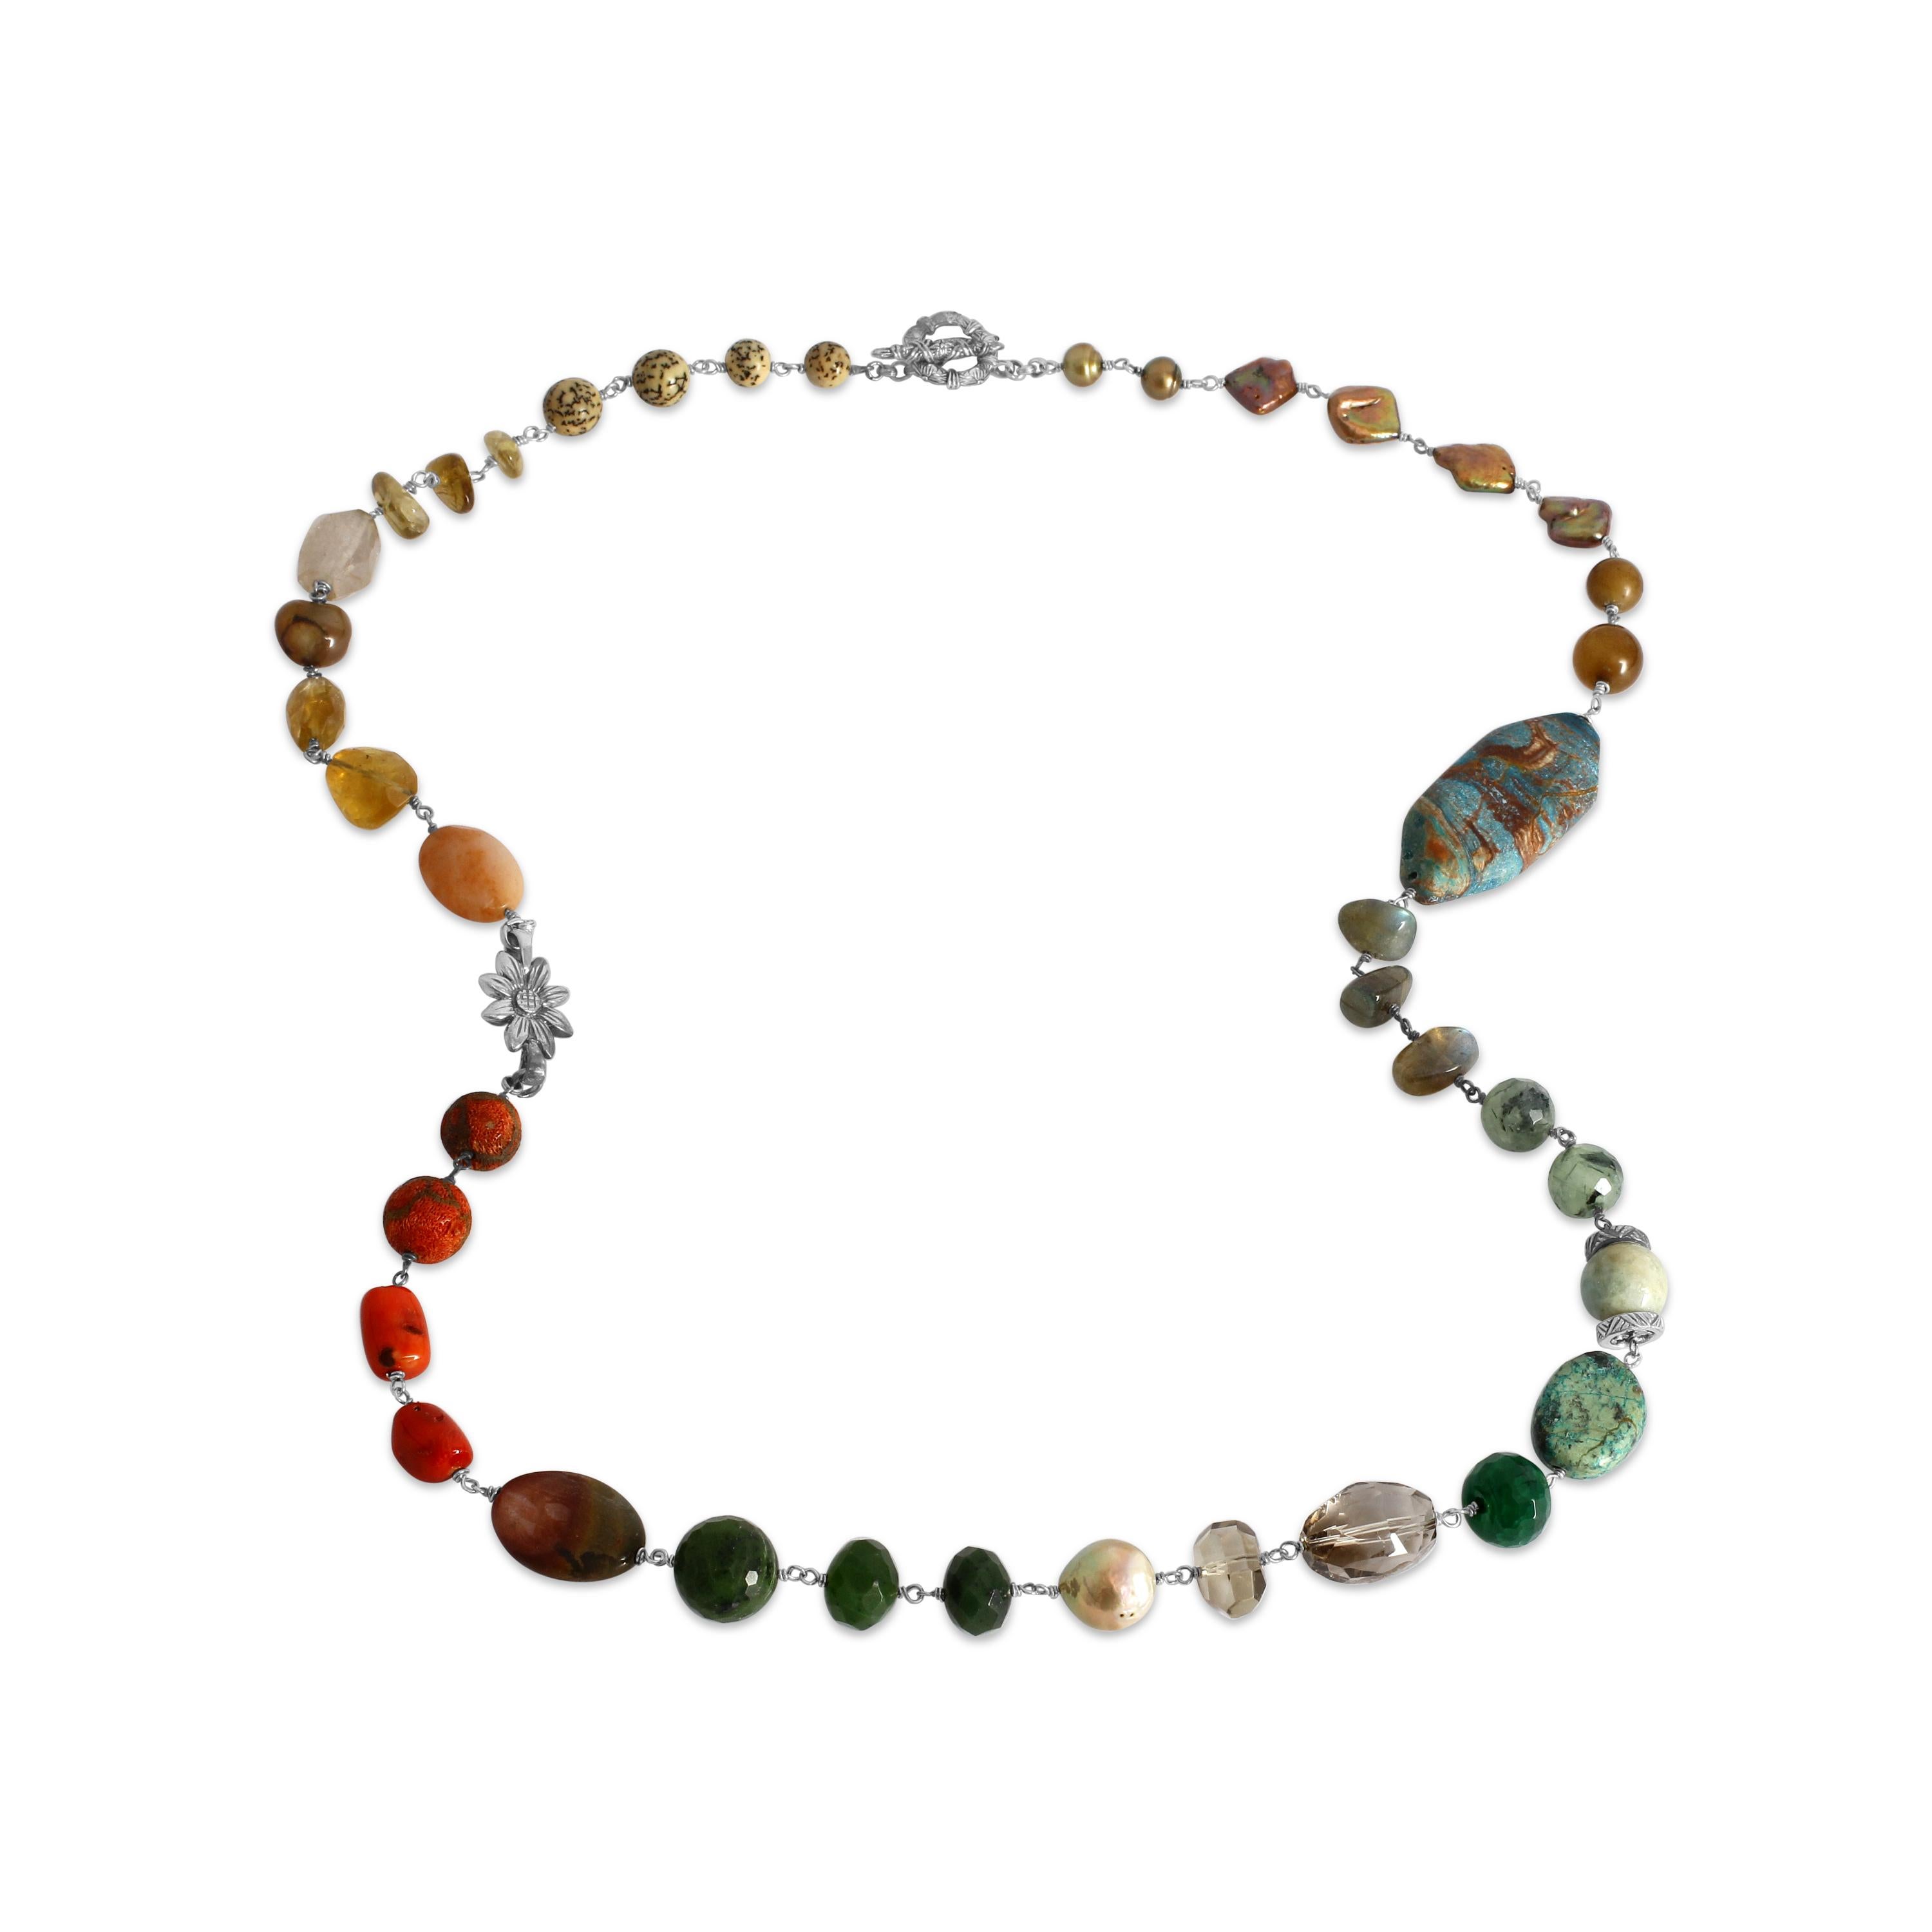 Borinut, Smooth Whiskey, Gold Hair Rutilated, Yellow Carnelian, Smoky Quartz, Smooth Aquamarine Necklace in Sterling Silver
